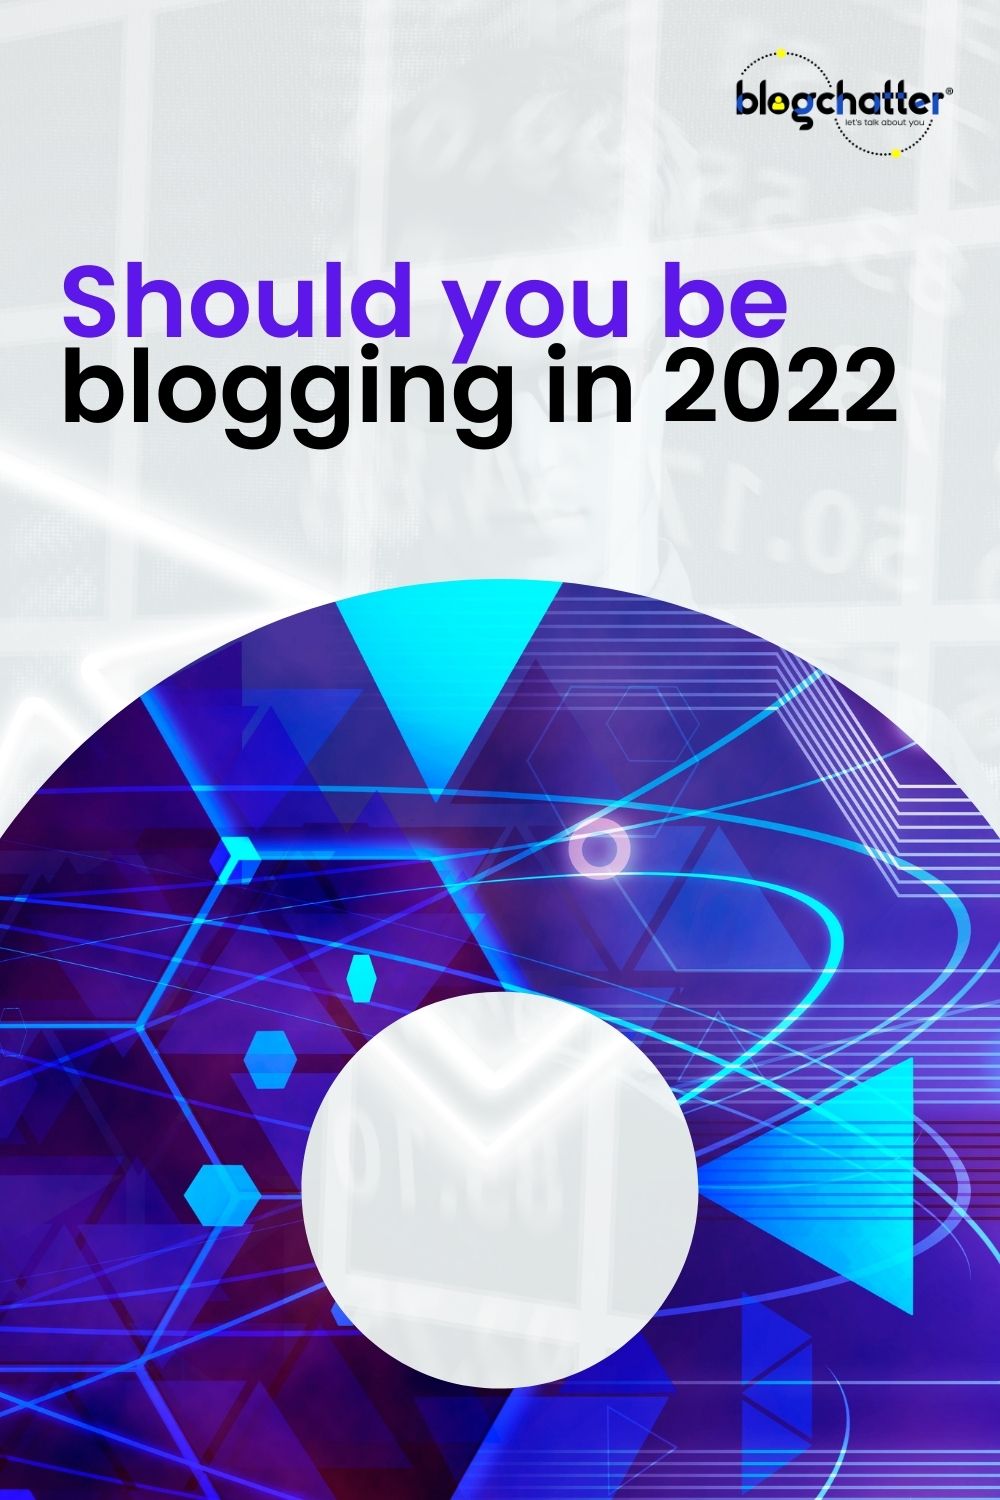 What are the benefits of blogging in 2022?